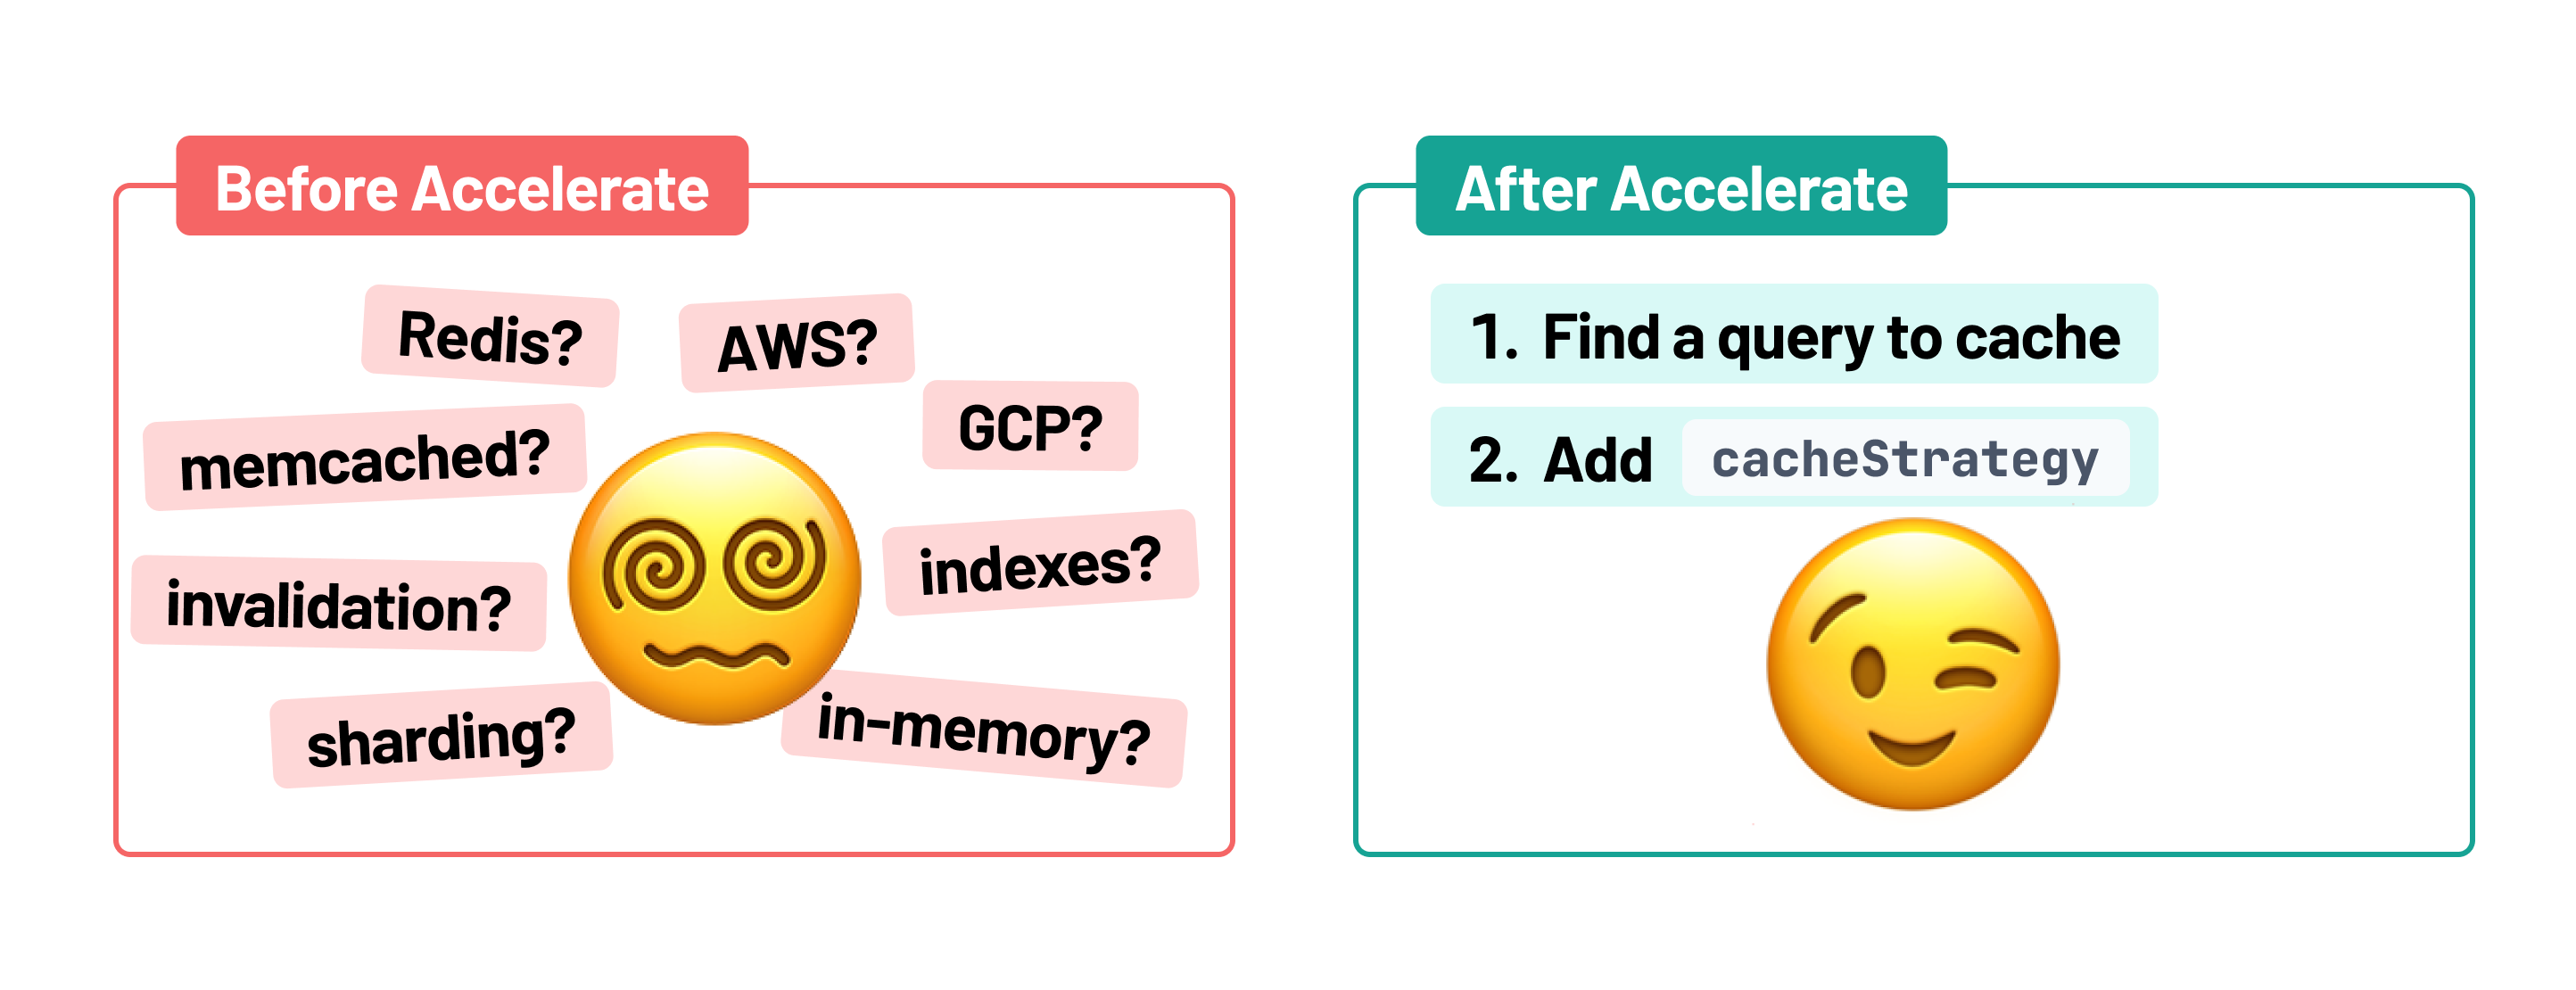 An image with two emoji. On the left is an emoji that looks dizzy and overwhelmed. Surrounding it are a lot of things that you have to think of when managing caching infrastructure: Redis, memcached, indexes, invalidation, in-memory, sharding, AWS, GCP. The emoji on the right is winking, clearly happy. It has two steps above it: 1. find a query to cache. 2. Use the Prisma Accelerate extension's cacheStrategy feature.